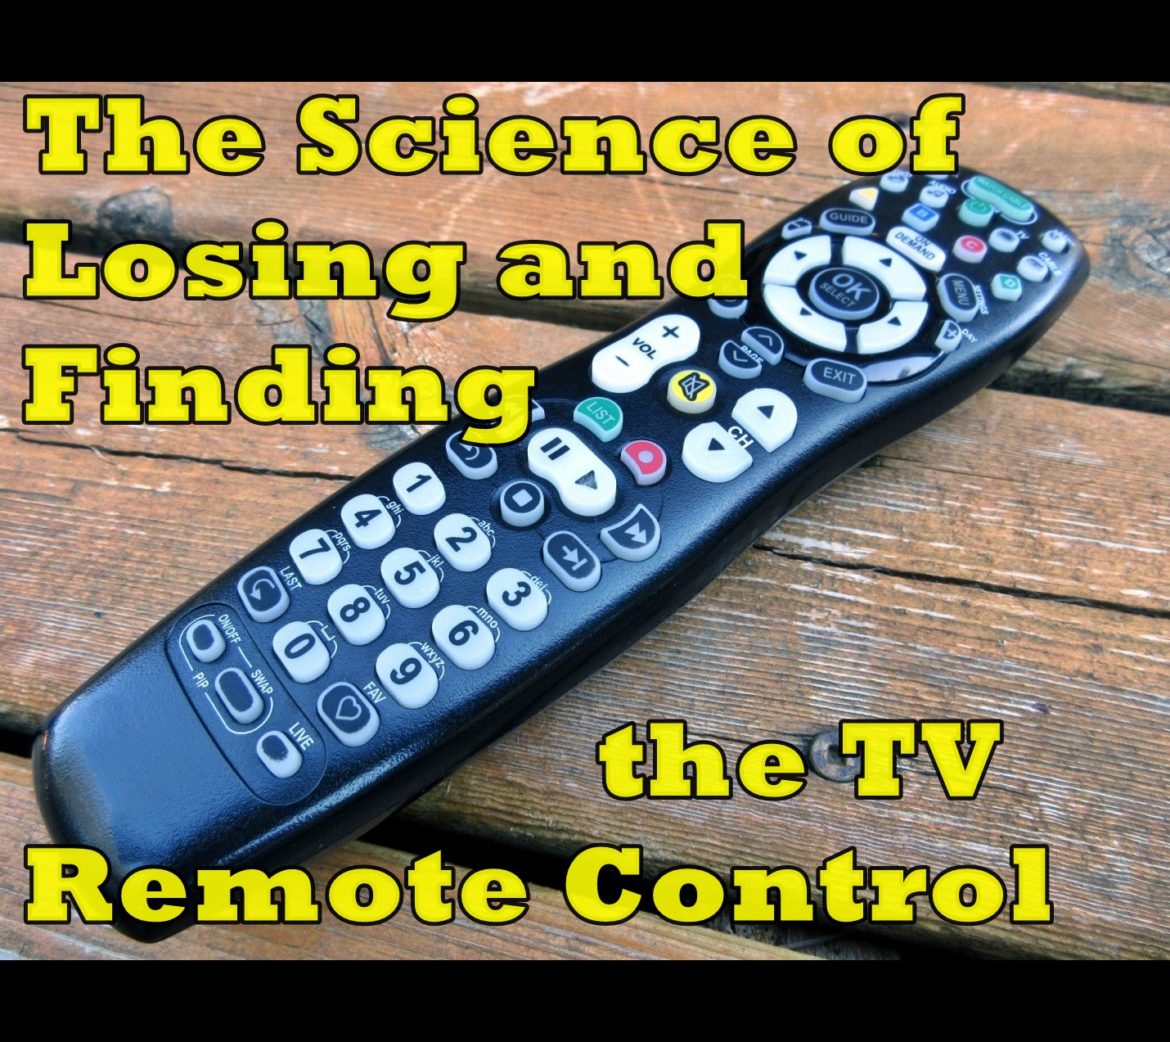 The Science of Losing and Finding the TV Remote Control